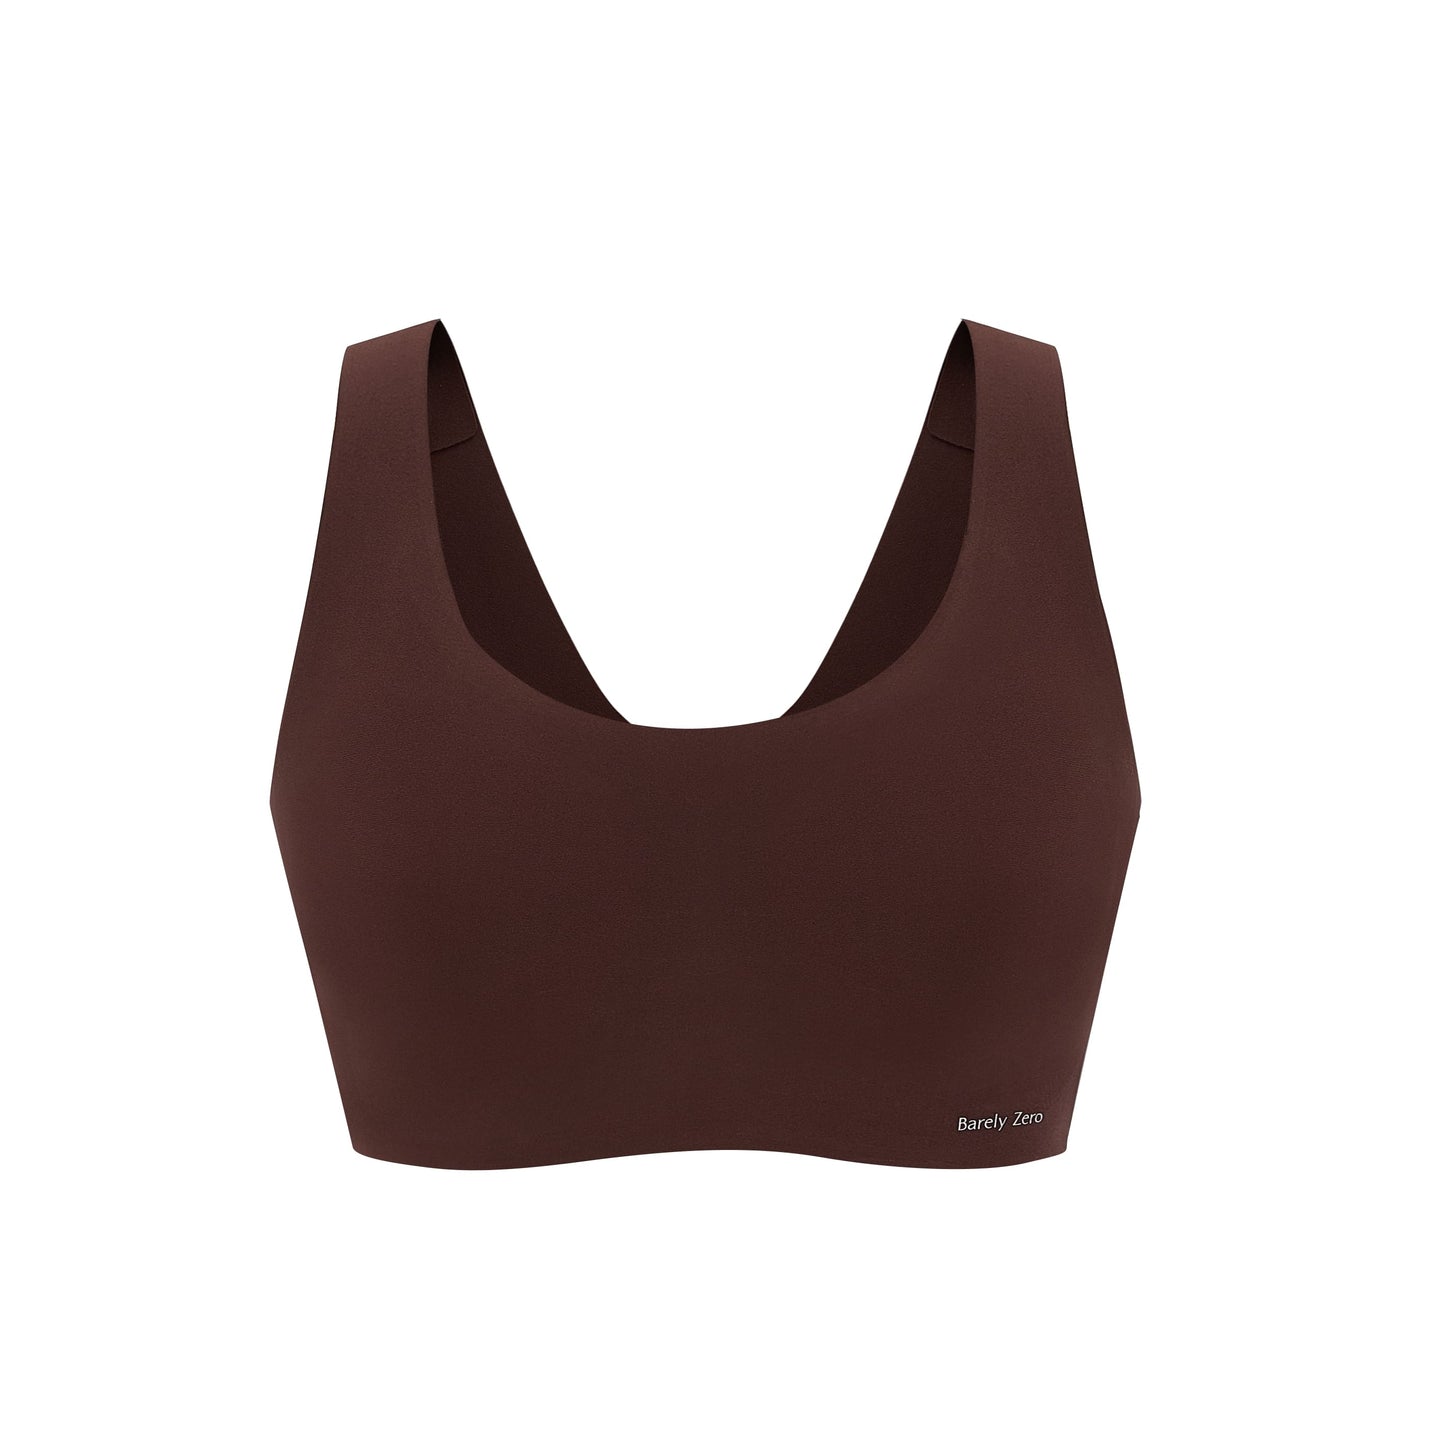 Flat lay image of brown bra with thick straps